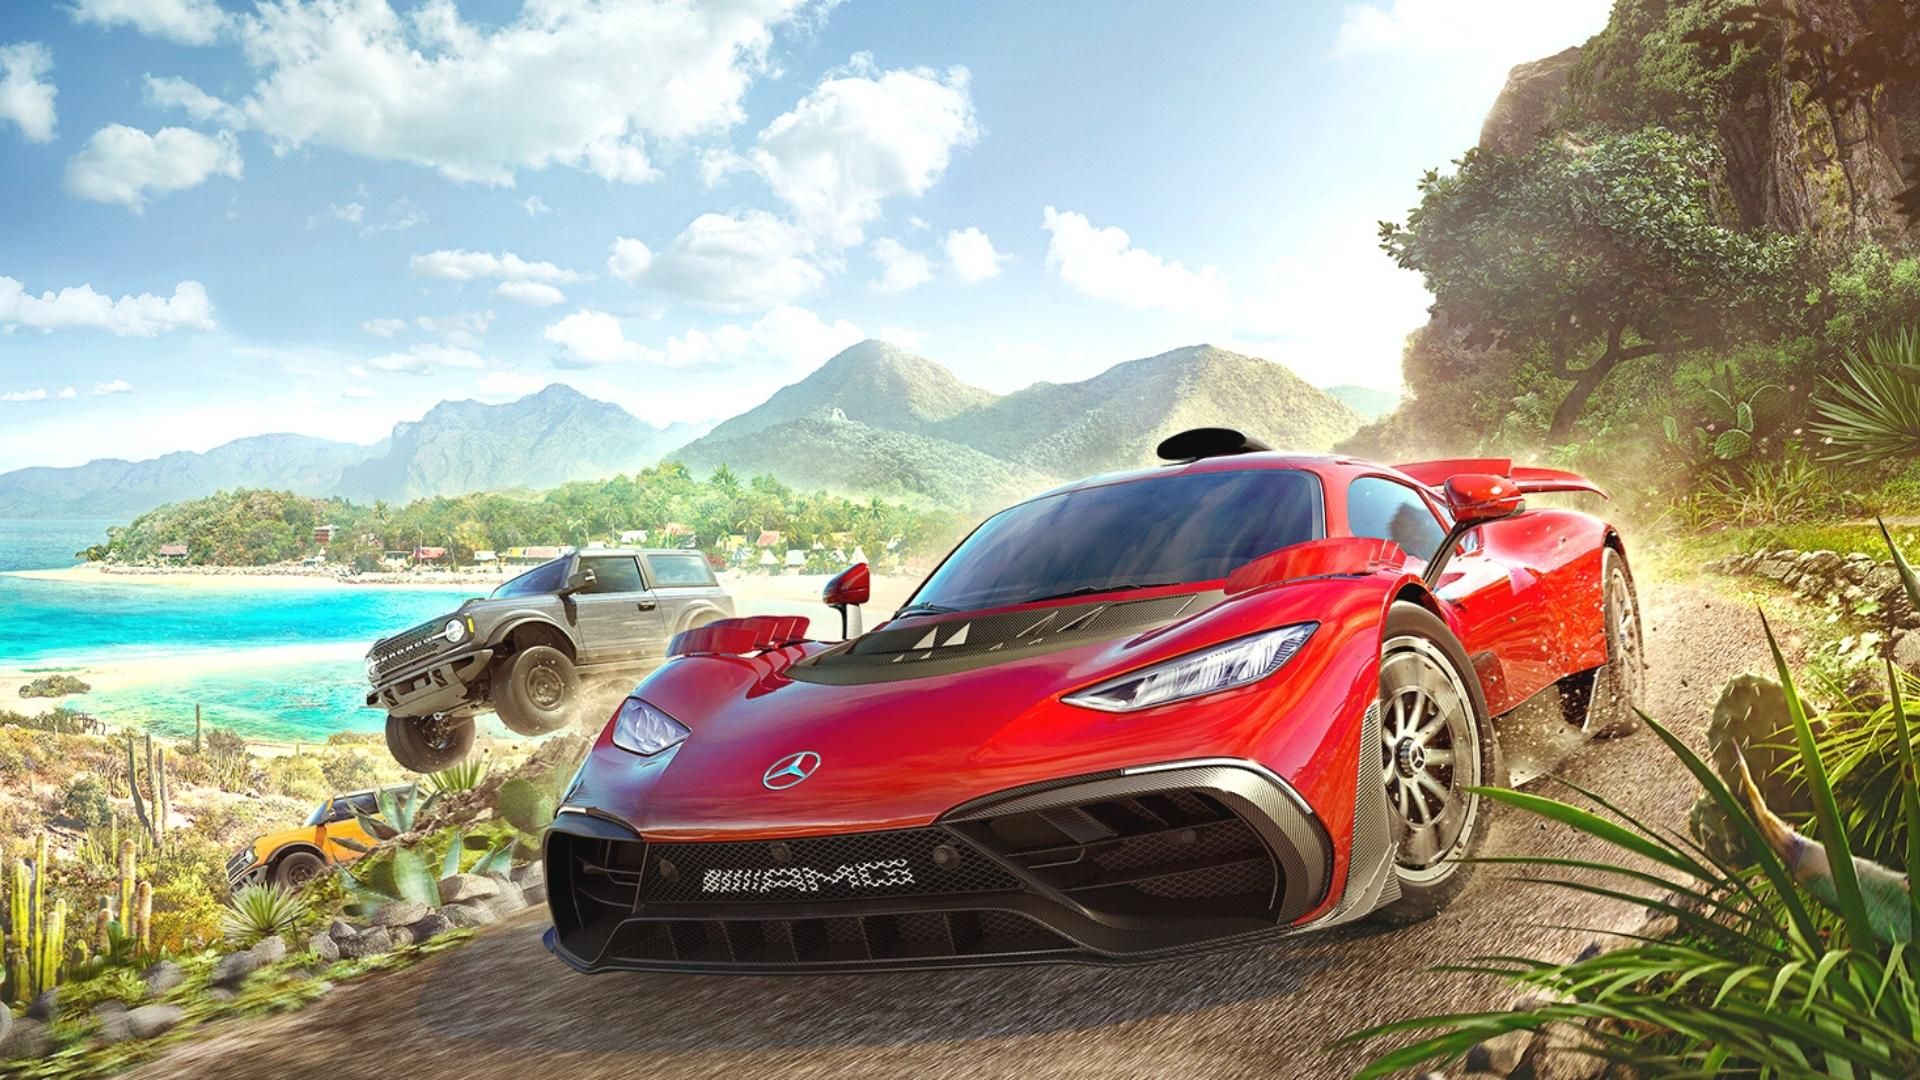 Forza Horizon 5 gets new progression system and custom races in Horizon Open in Series 6 update